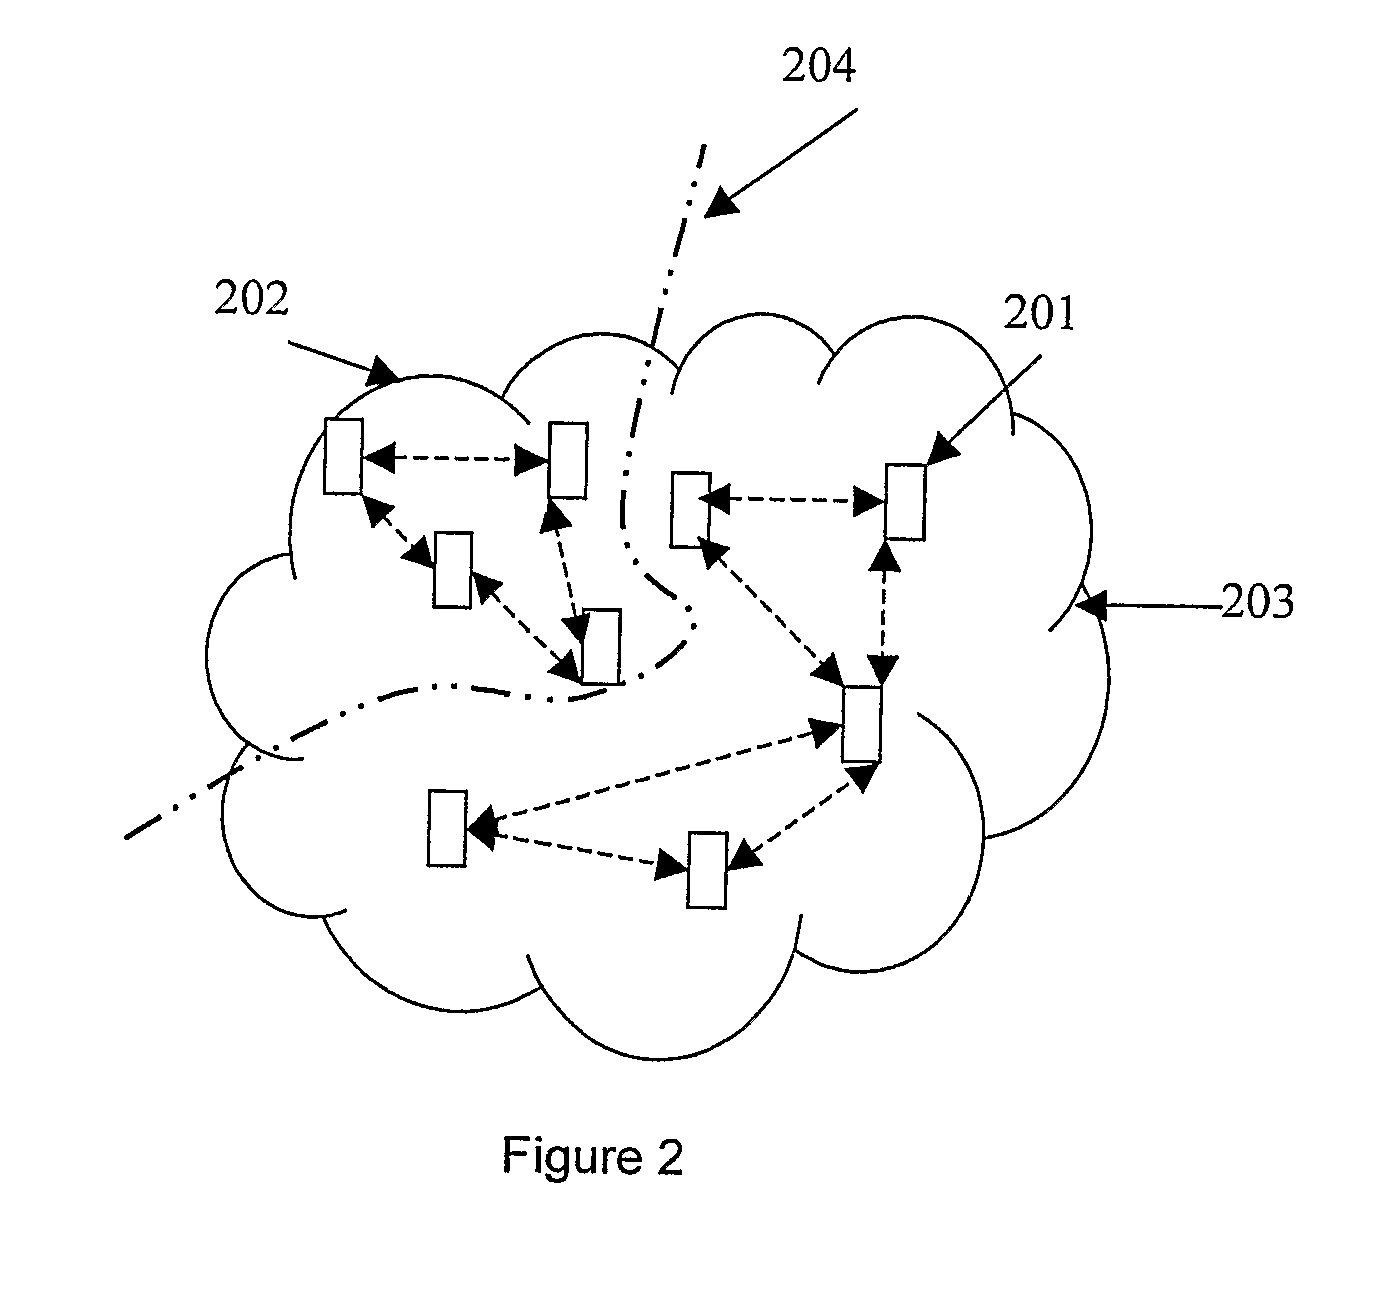 Method for building spontaneous virtual communities based on common interests using wireless equipment